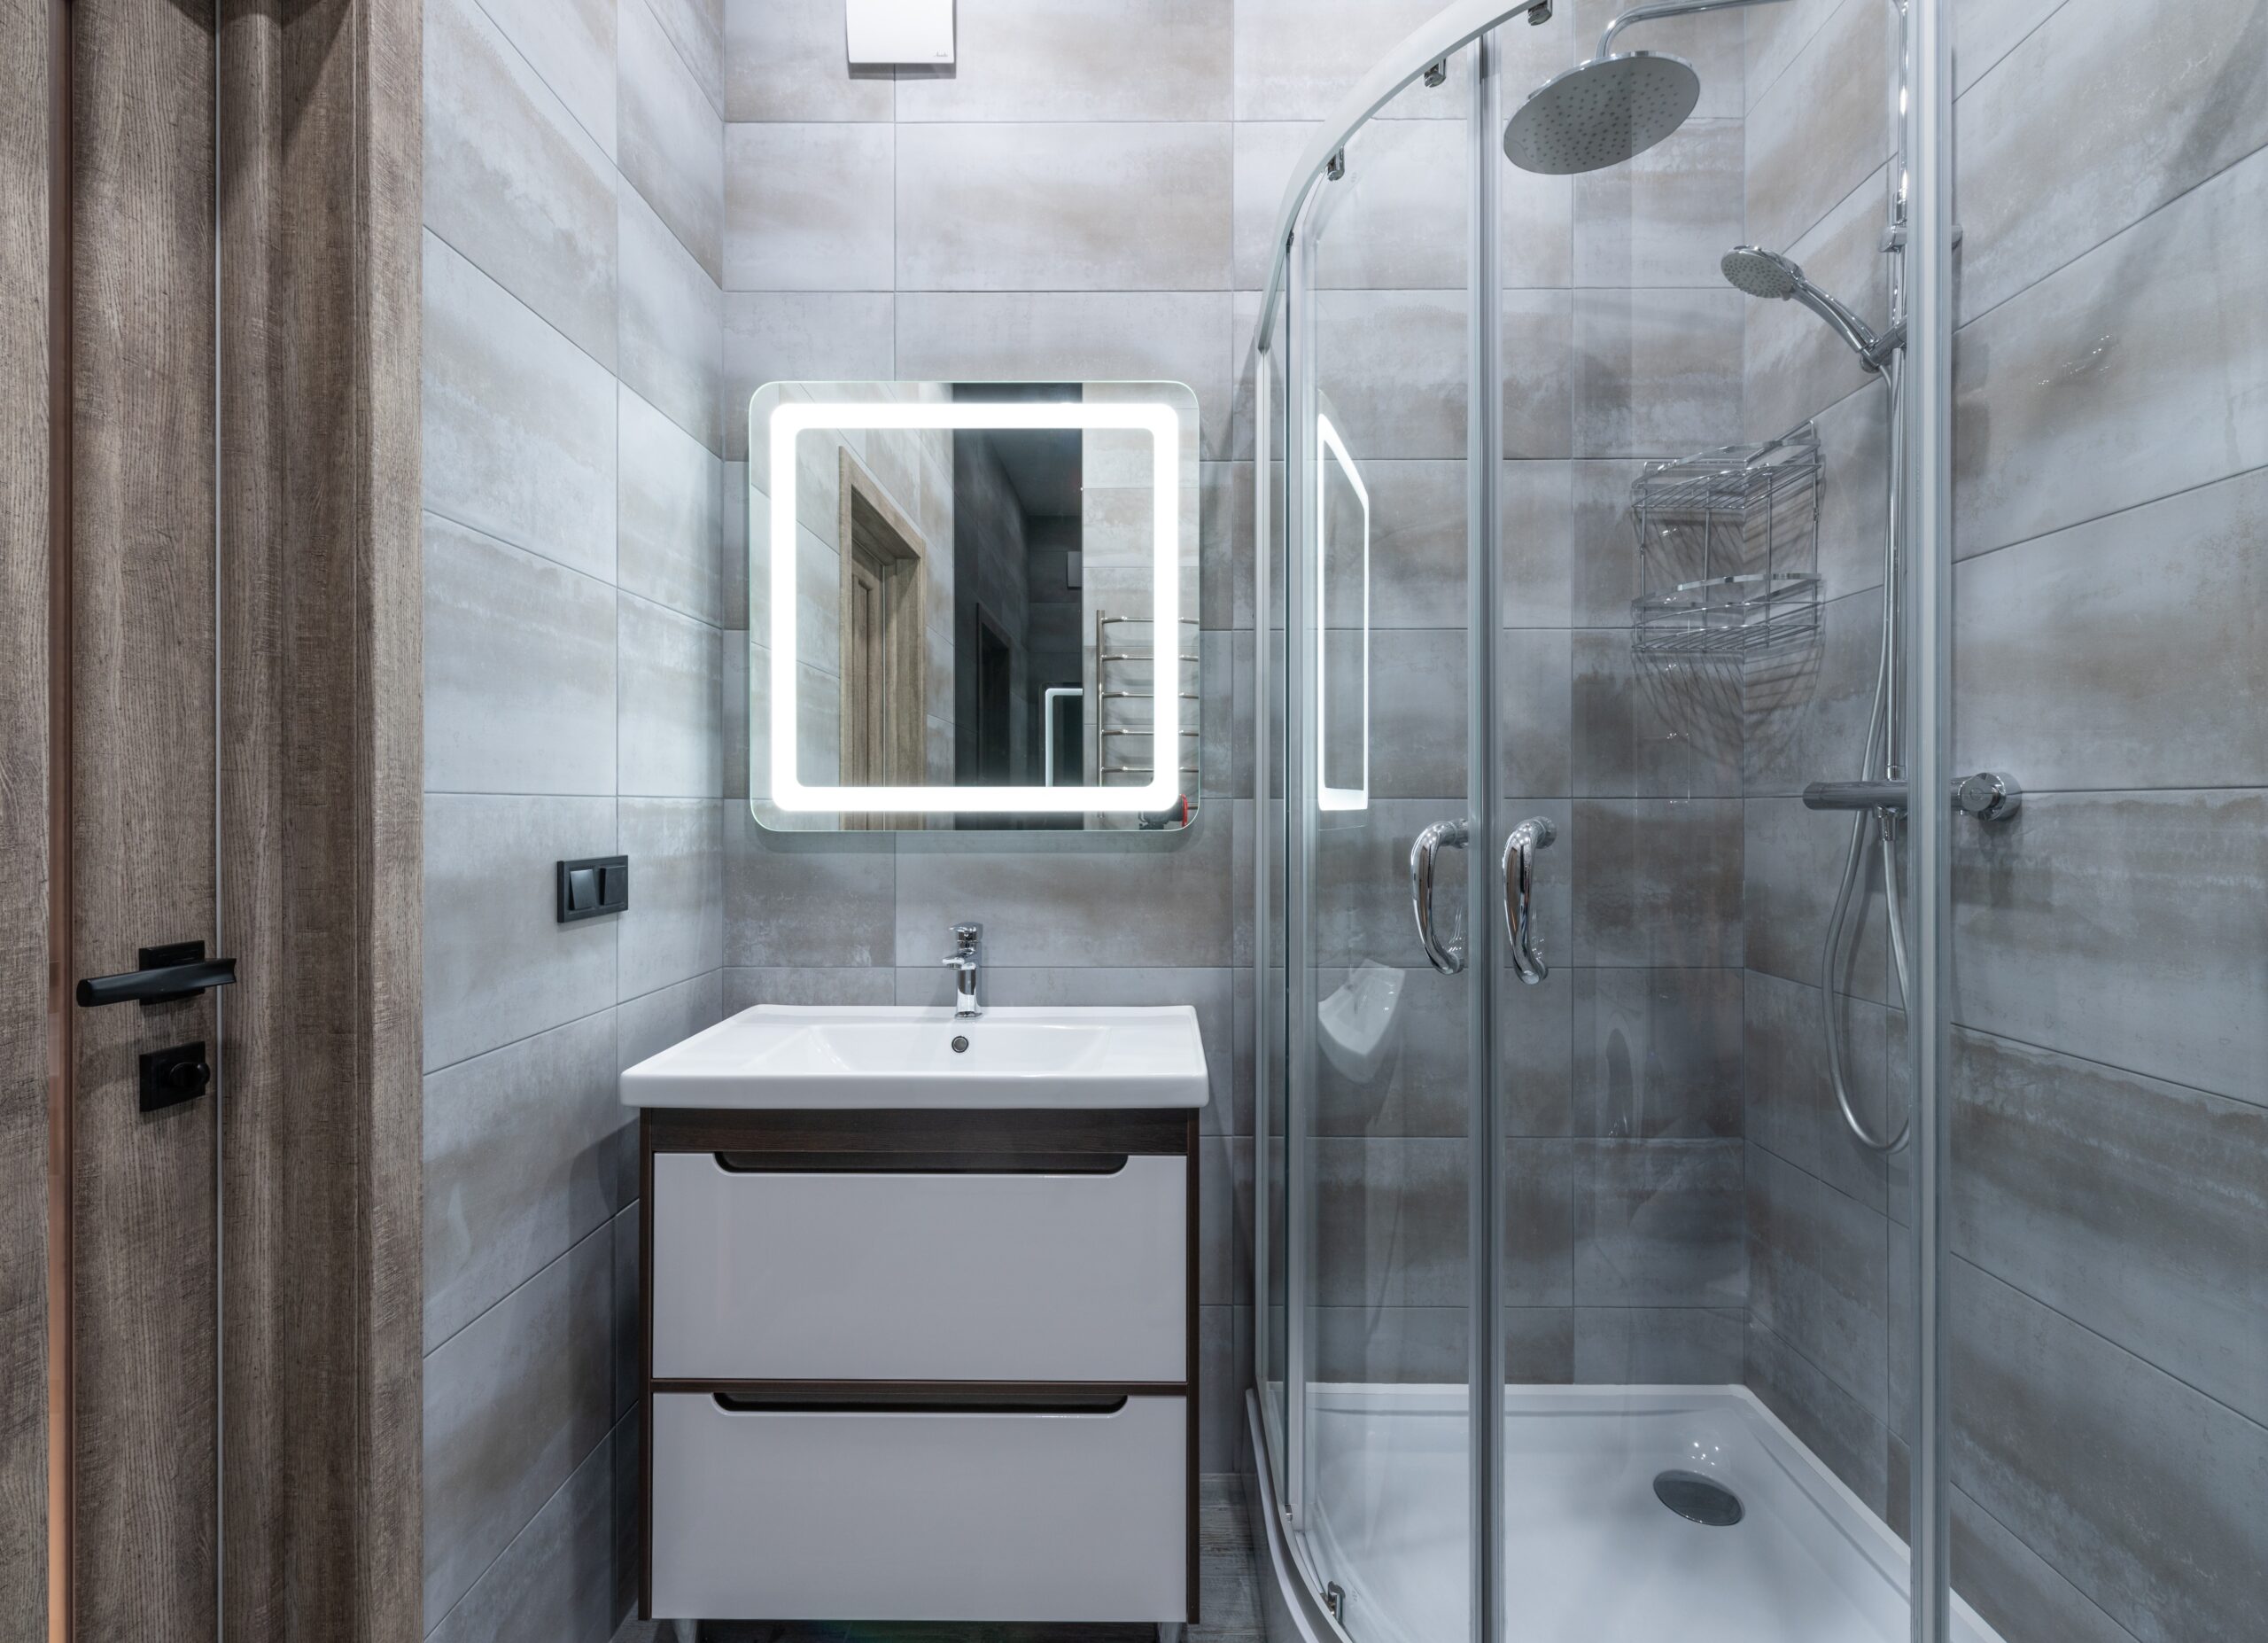 13 Ideas for a Shower Upgrade